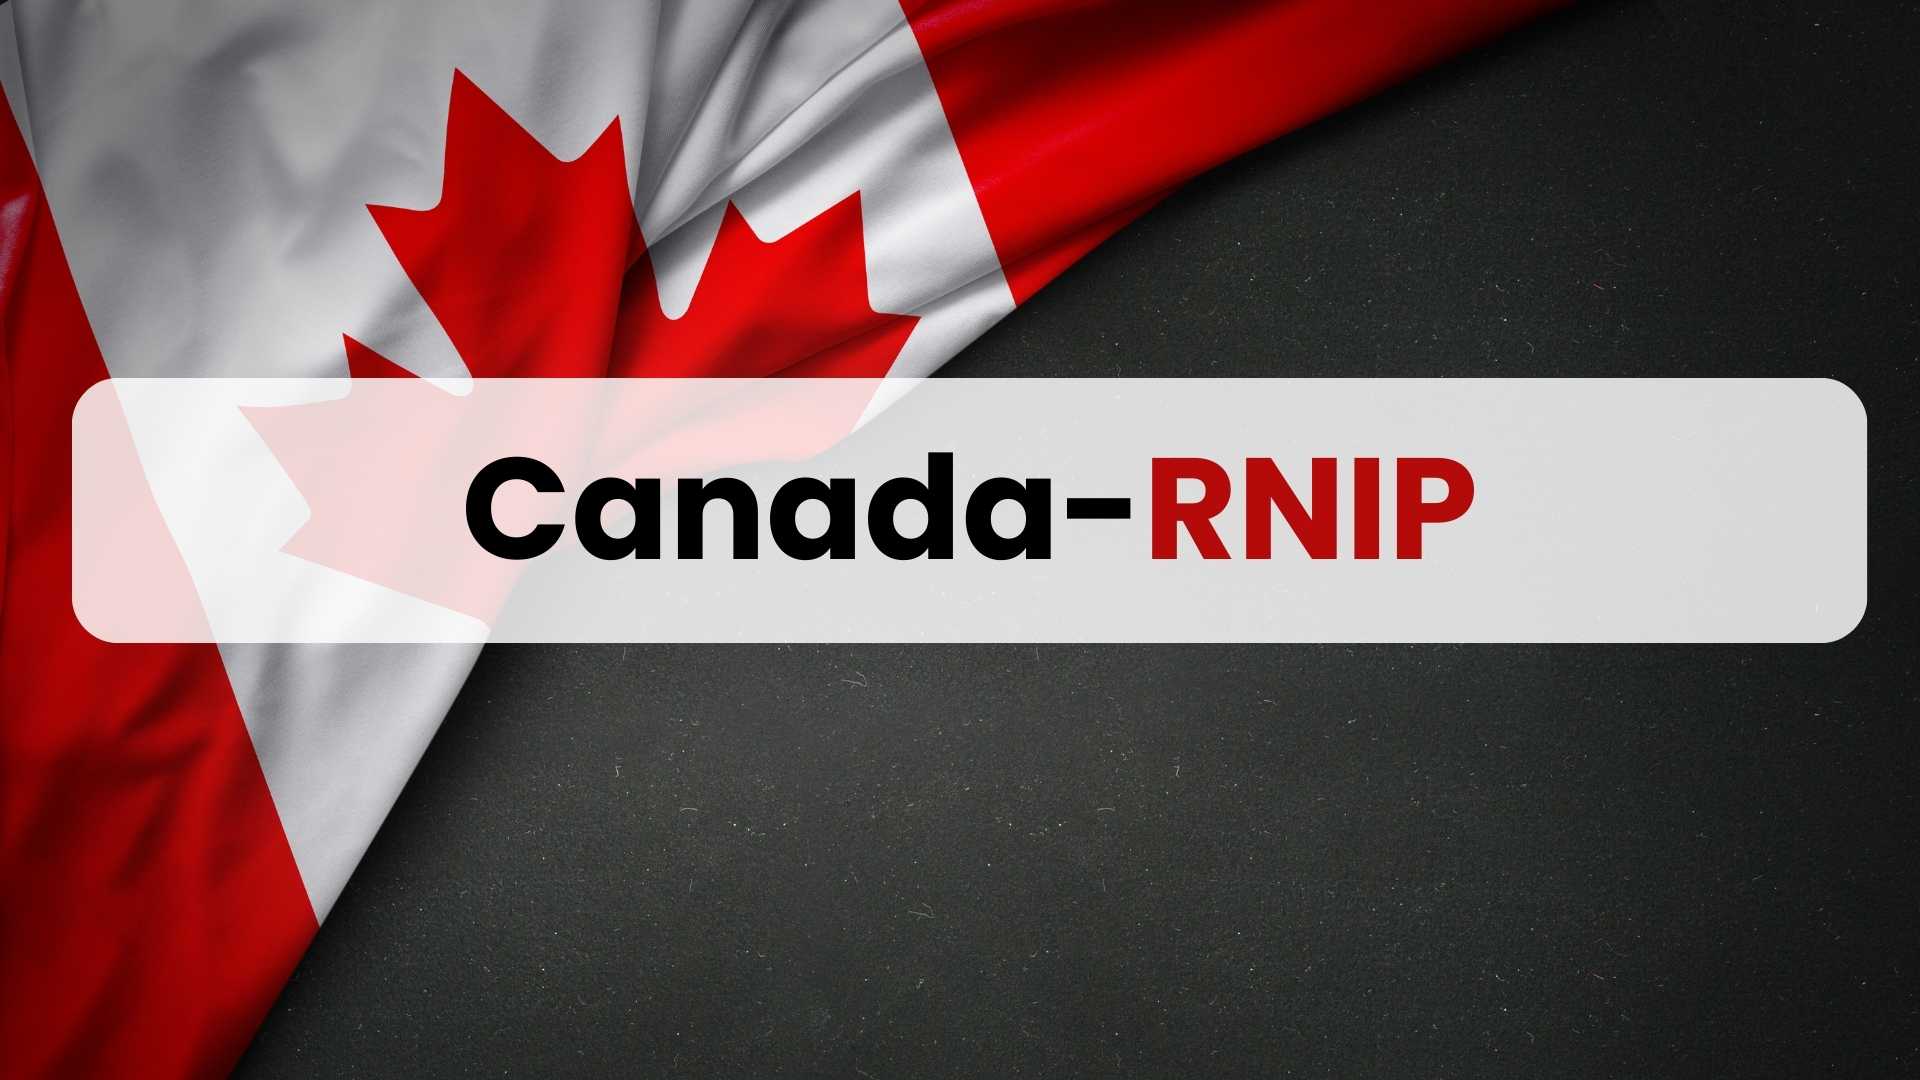 Canada-RNIP (Rural and Northern Immigration Pilot)